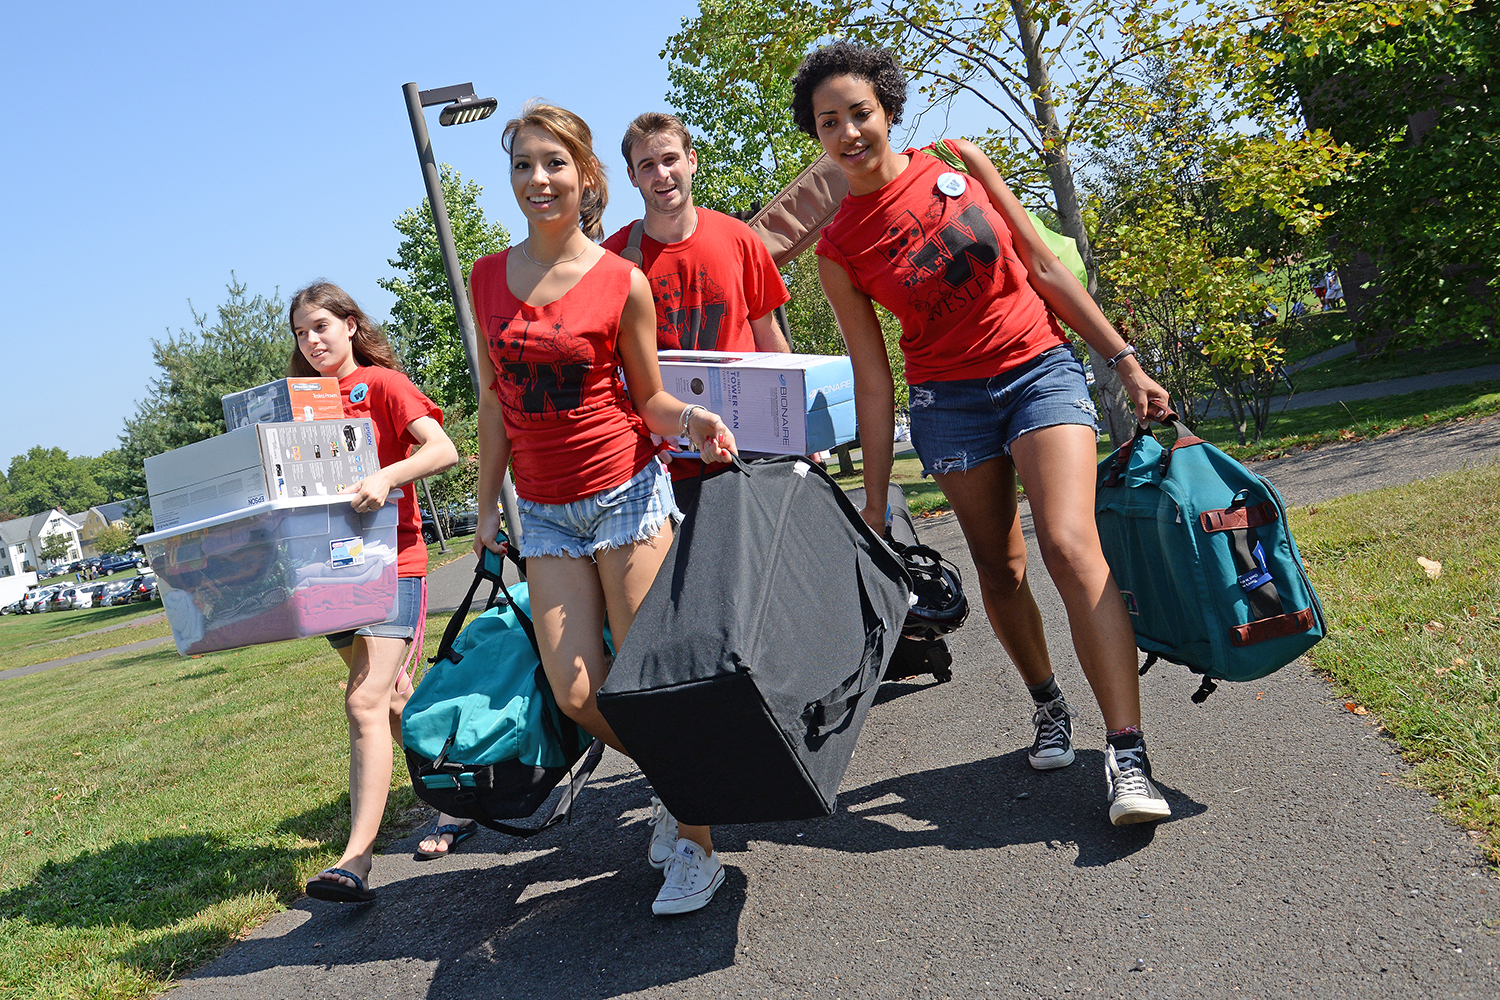 Wesleyan student-athletes, staff and Orientation Leaders helped members of the Class of 2018 move into their student residences on Arriva Day, Aug. 27.